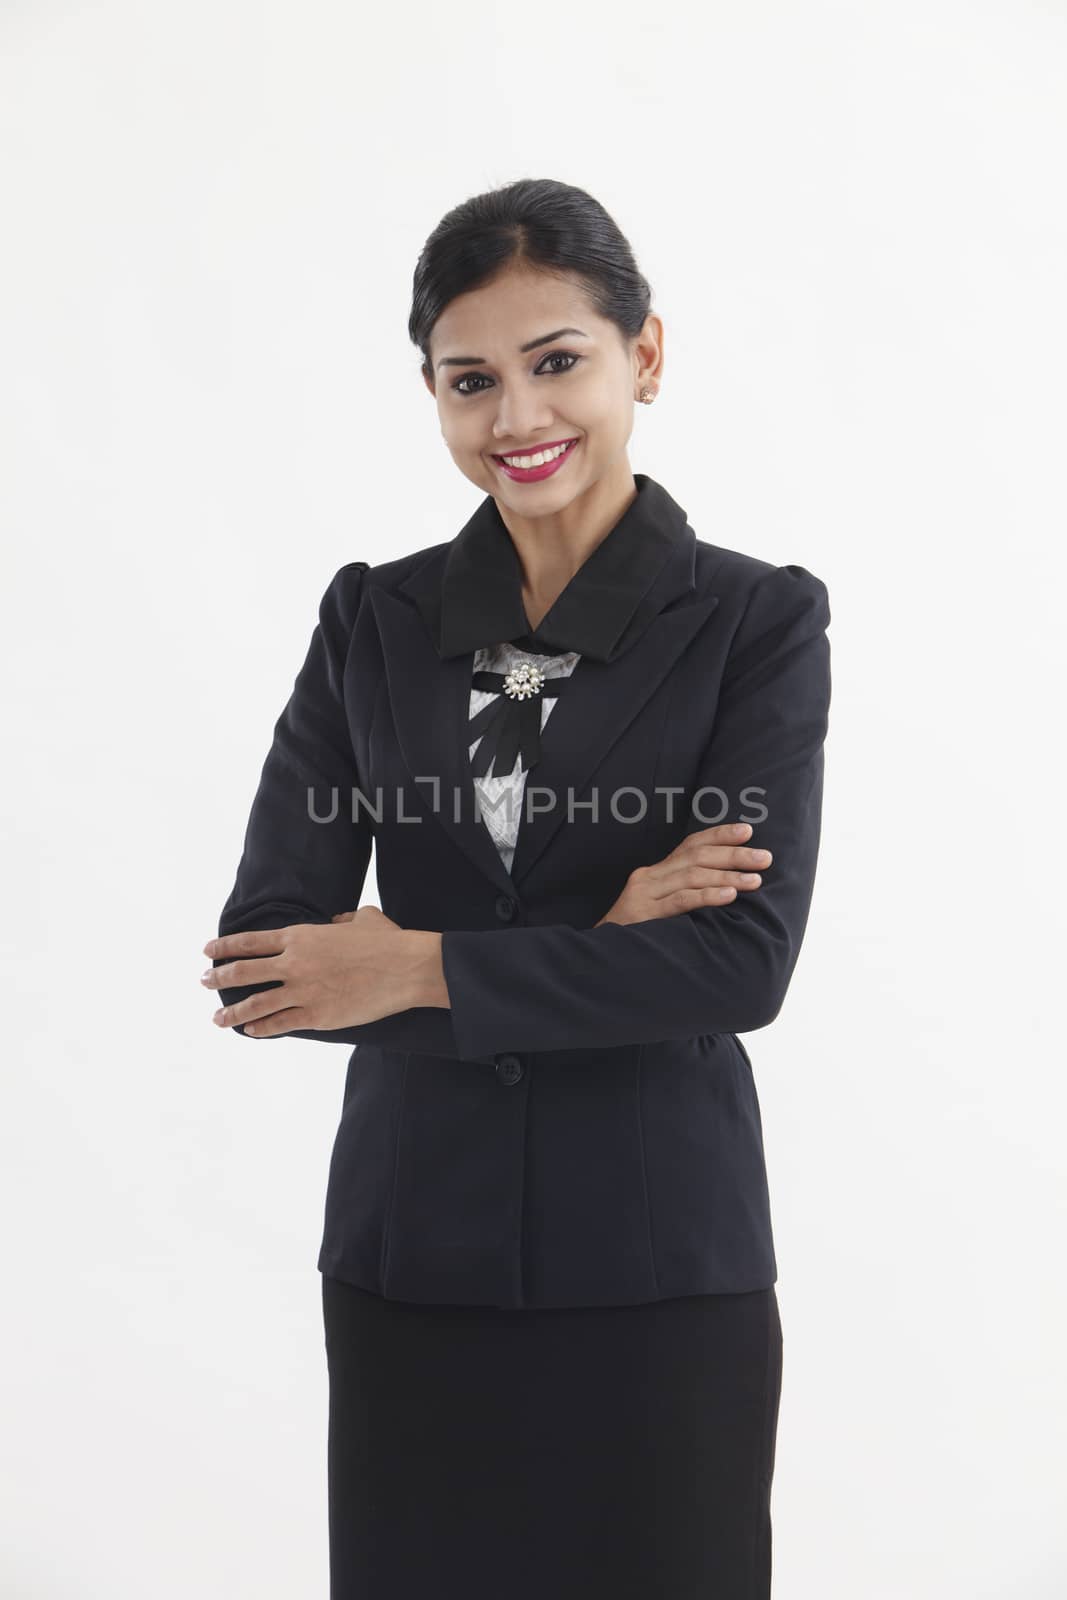 Portrait of a well-dressed young business woman with cross-armed

